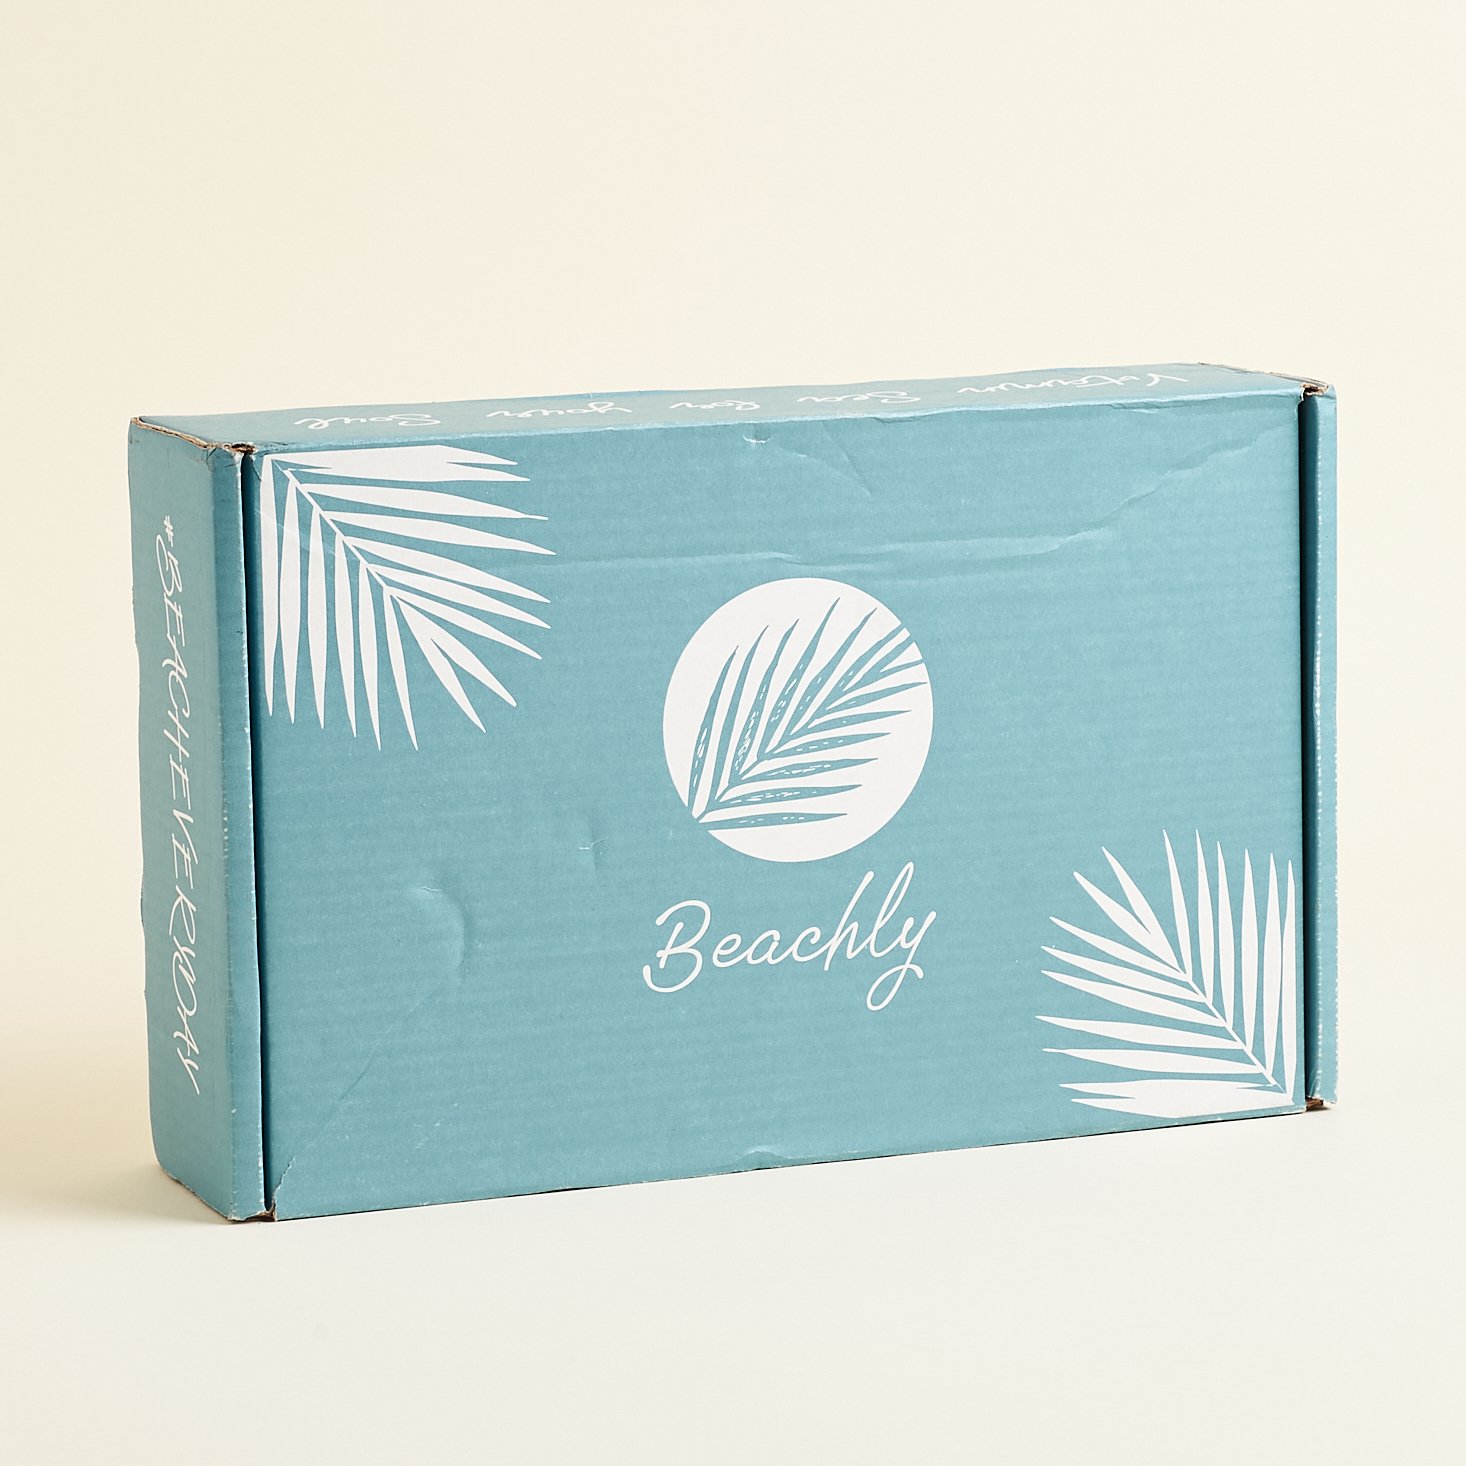 Beachly Lifestyle Box Review + Coupon – Spring 2020